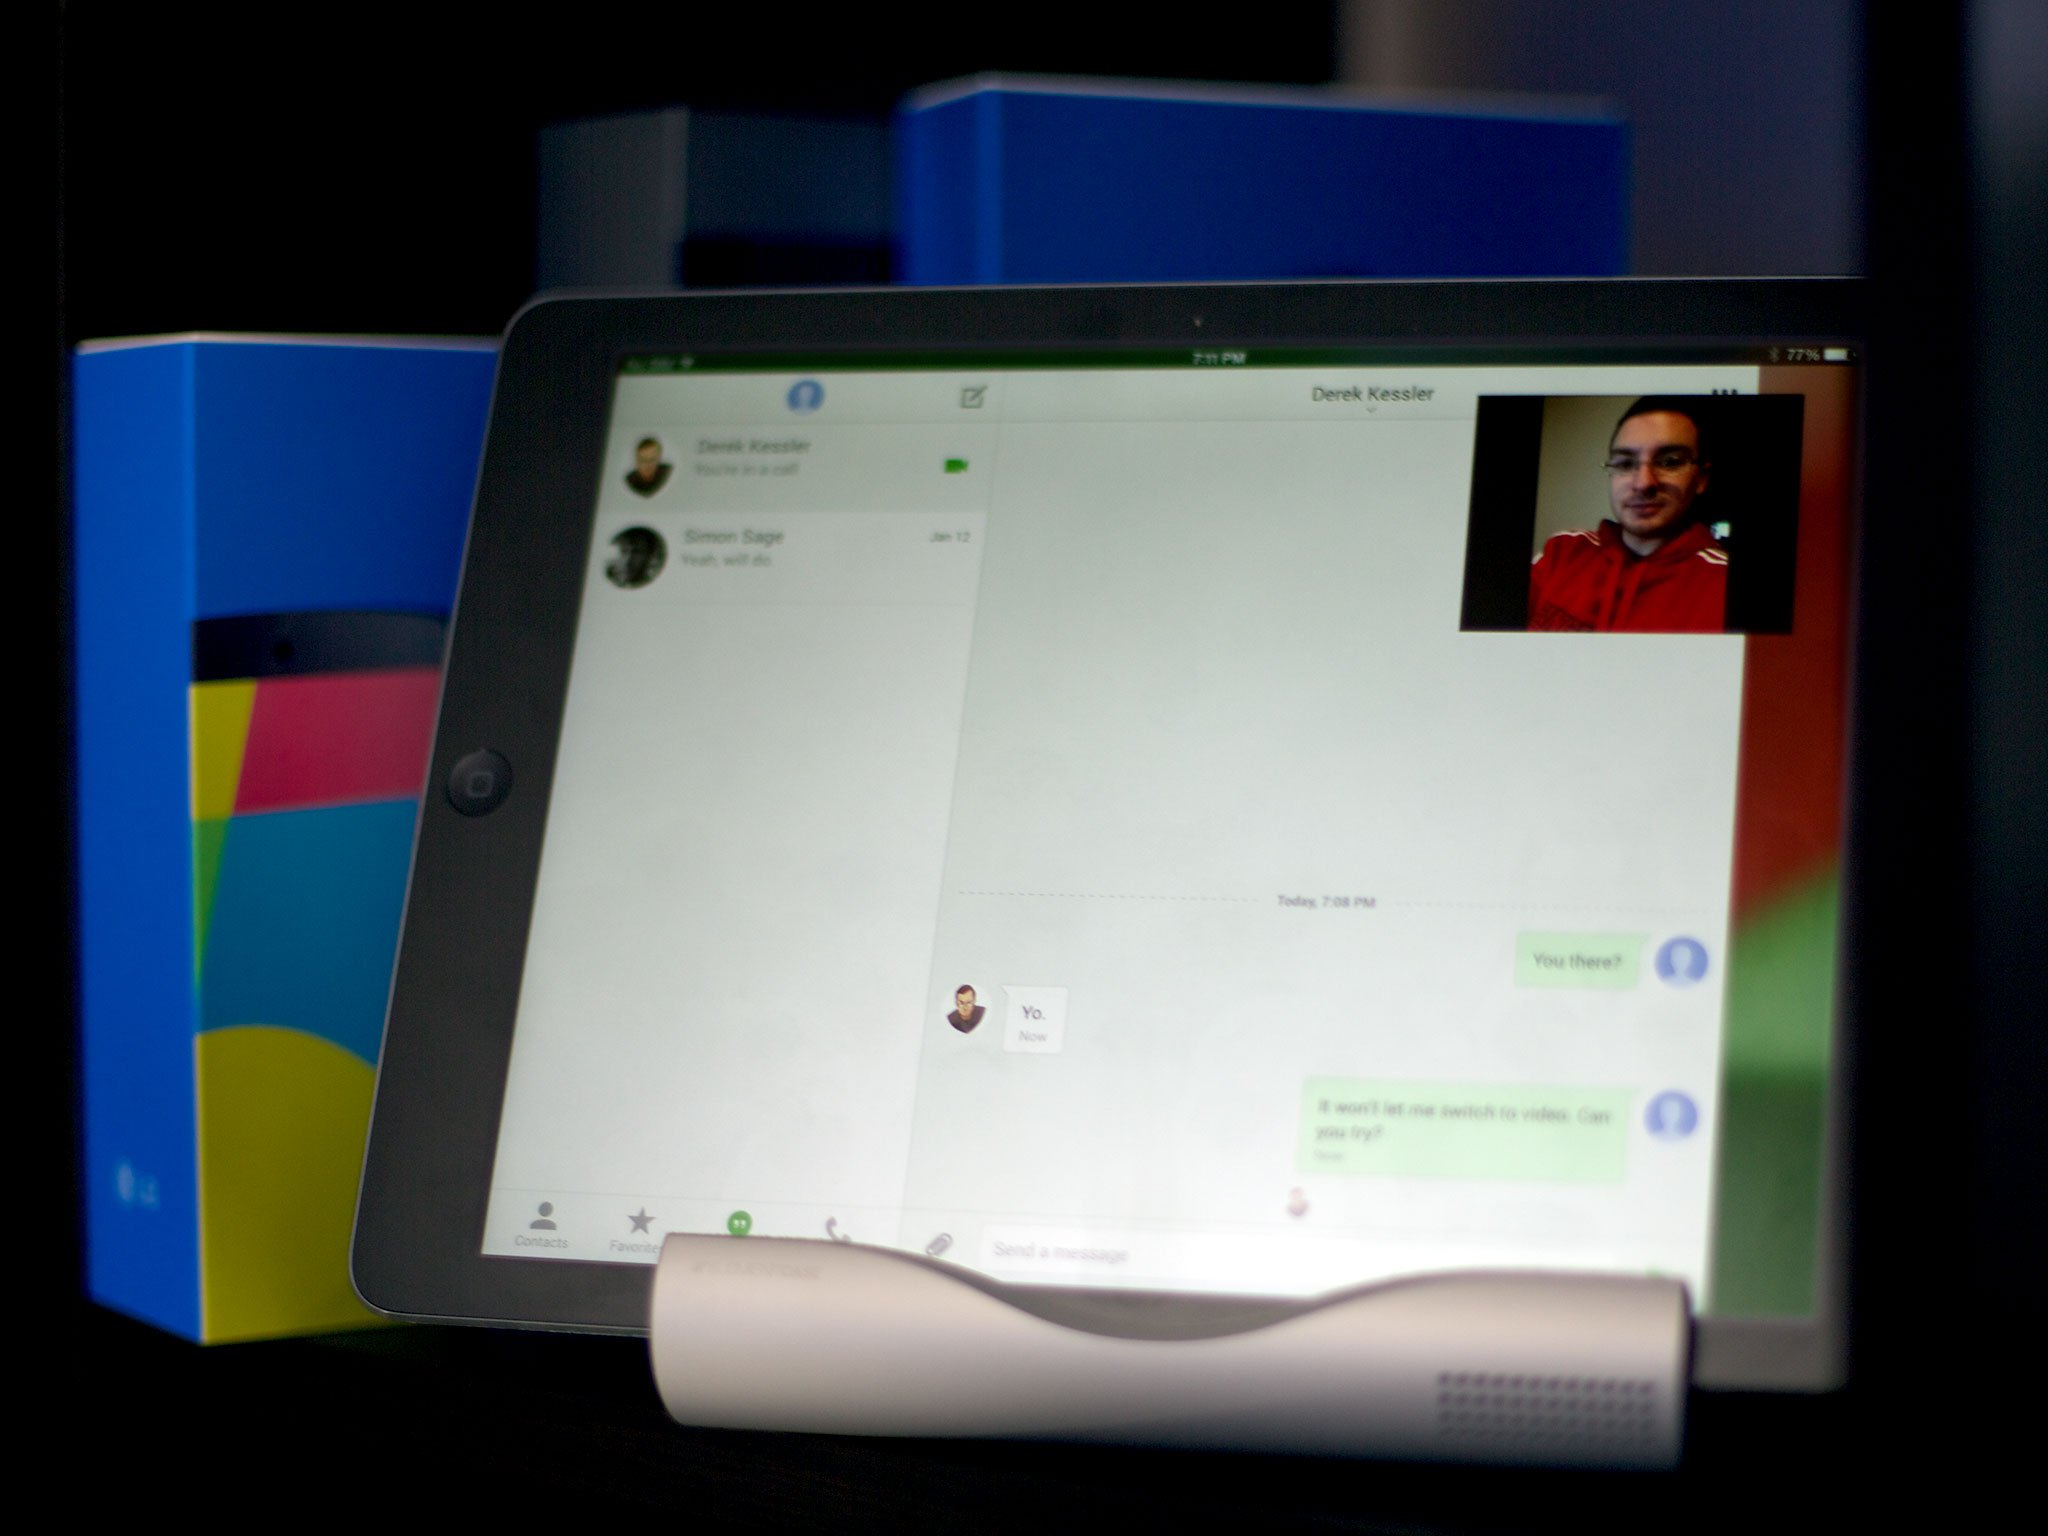 Google Hangouts 2.0 is here with iOS 7 design, iPad optimization, animated stickers, and more!